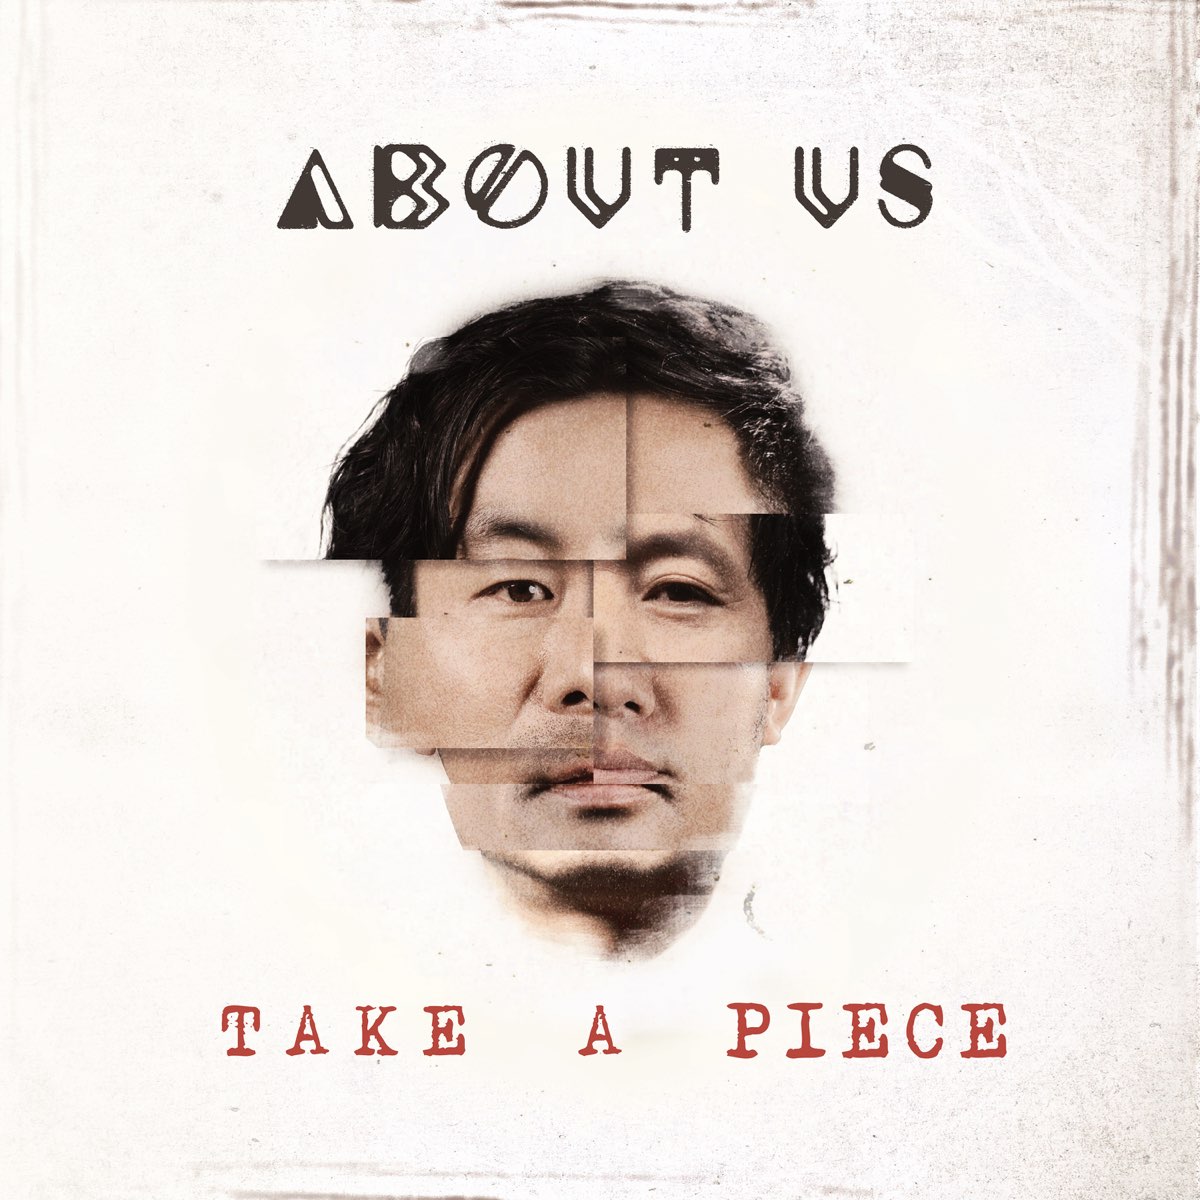 🎤 About Us
💿 Take A Piece
⌛️ 40:02
🎸 Hard Rock
🌏 India  🇮🇳 / Nagaland
📅 12-04-24 🆕
➡️ open.spotify.com/intl-es/album/…

🌐 facebook.com/AboutUsNagaland
🌐 instagram.com/about_us_nagal…
🌐 @boutusNagaland

#SepulMetal #SepulRecommended #HeardAndShared #FrontiersRecords